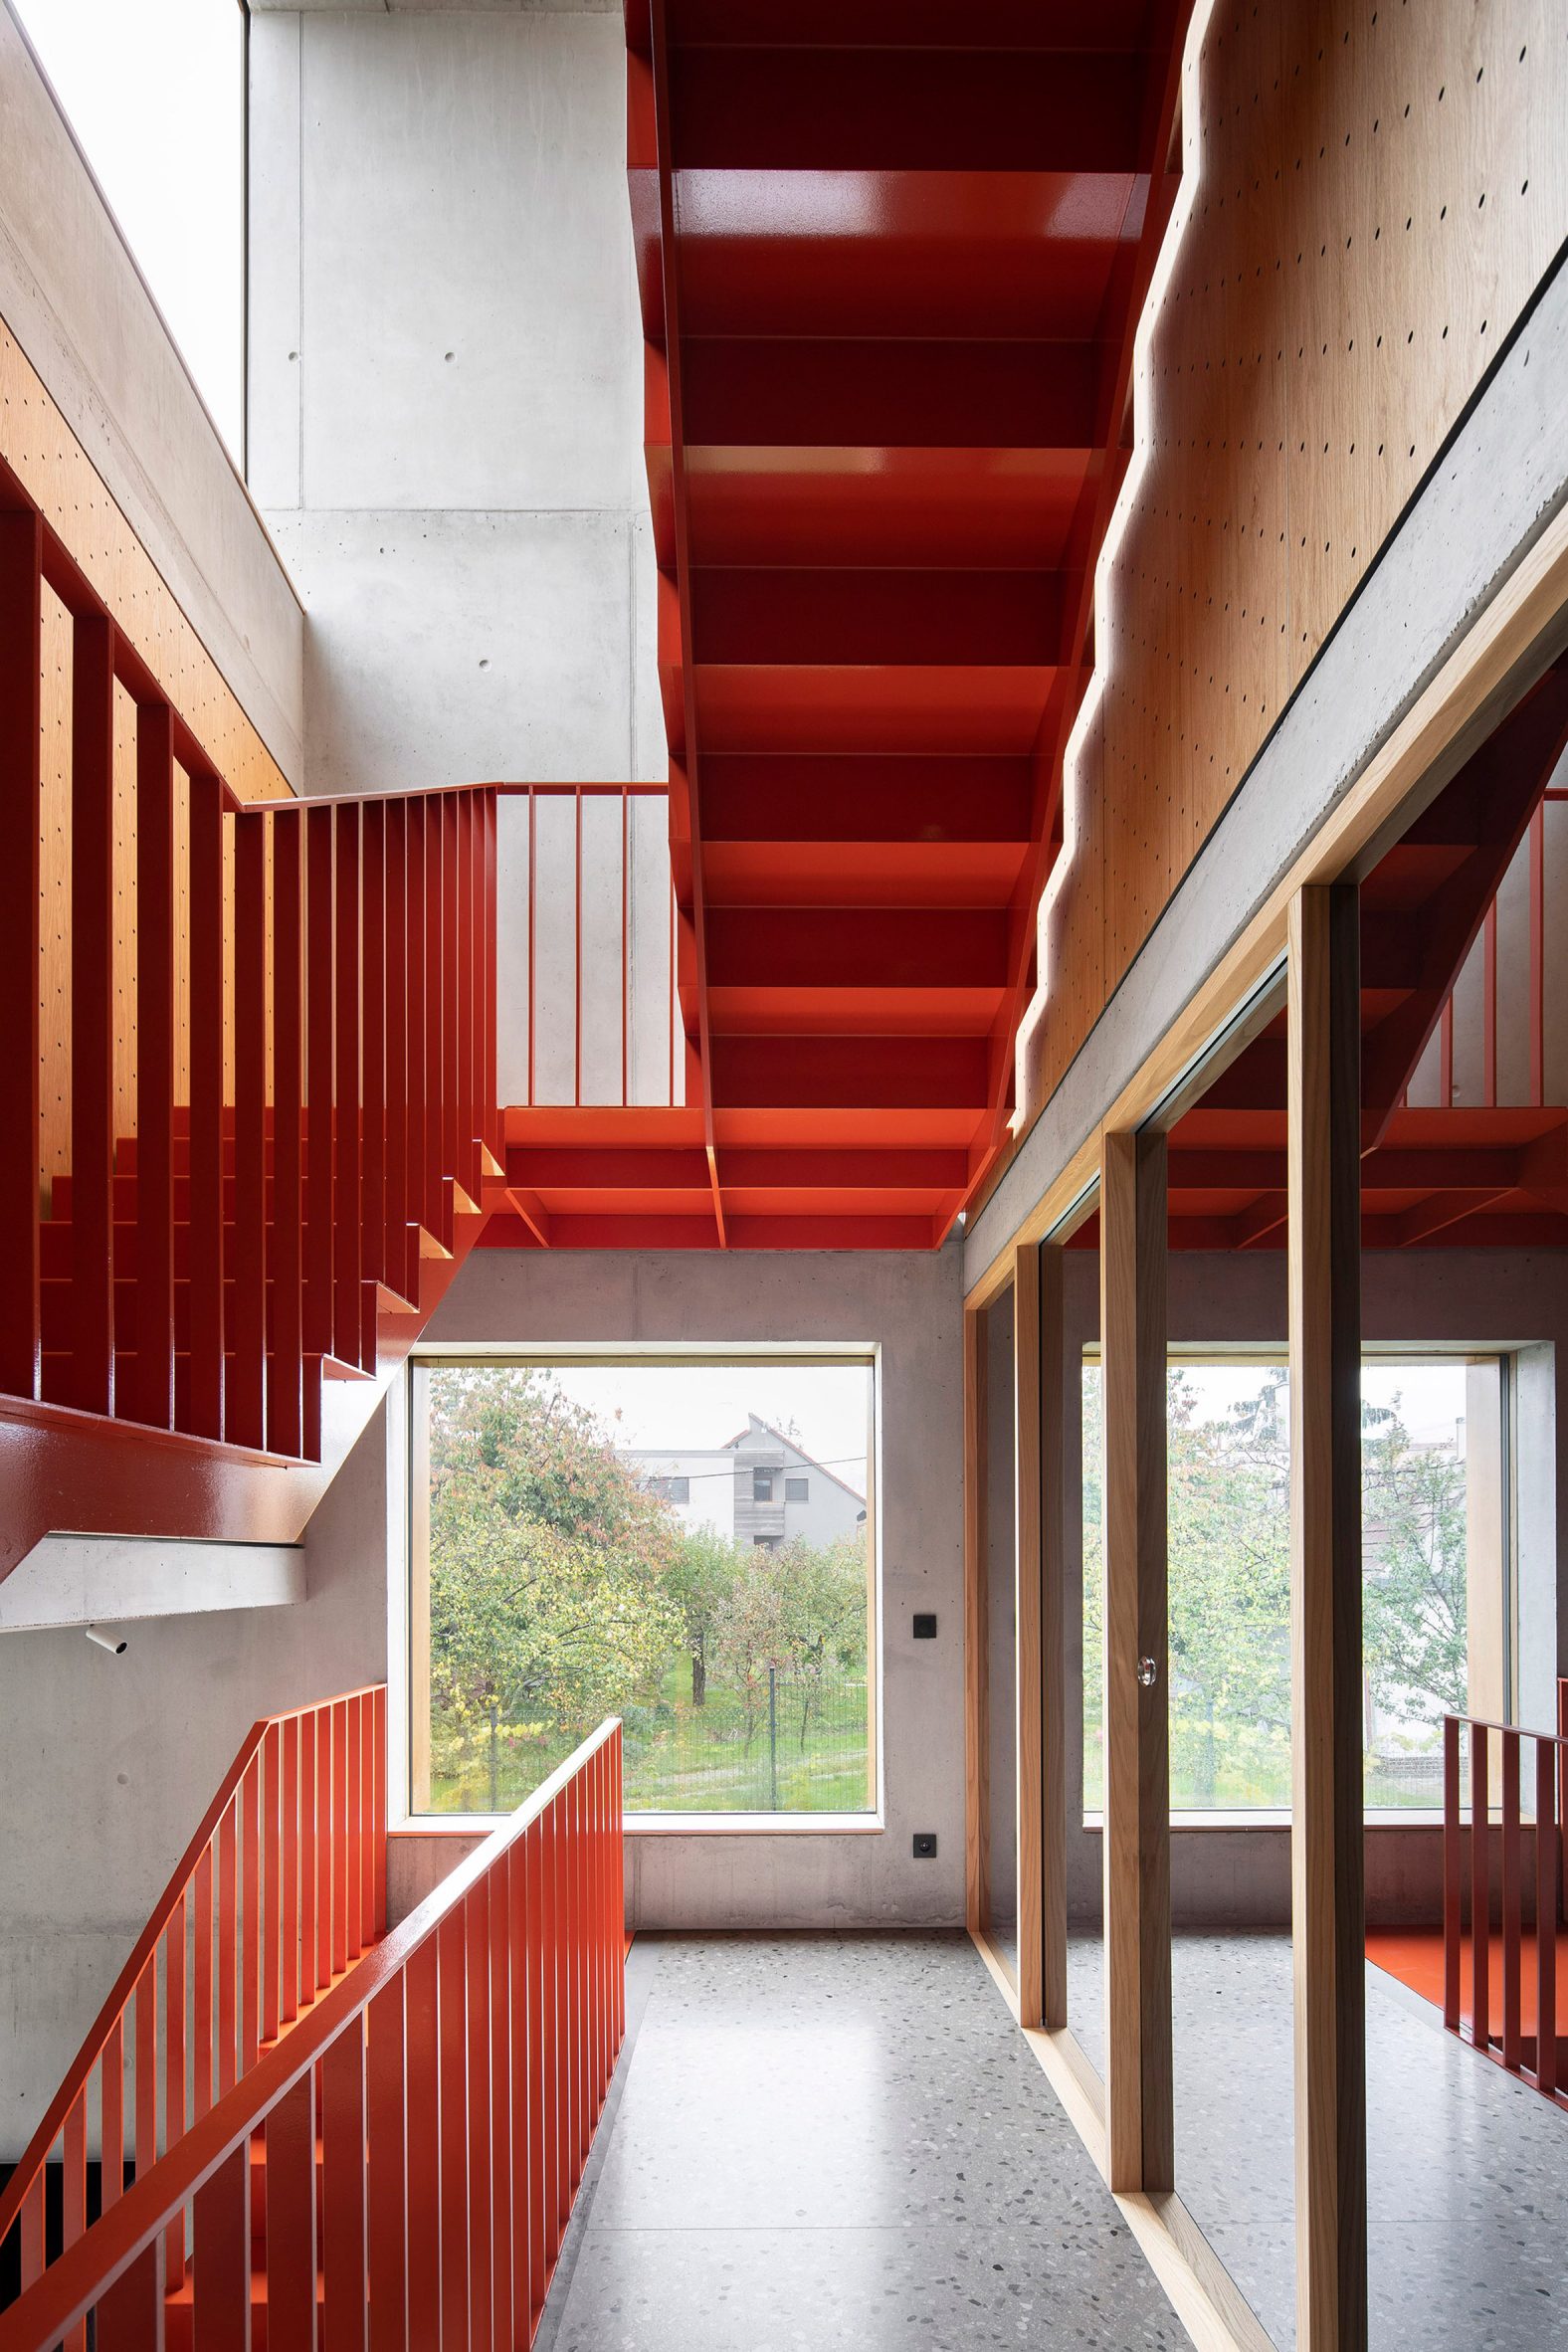 Stairwell of Na Rade House in Slovakia